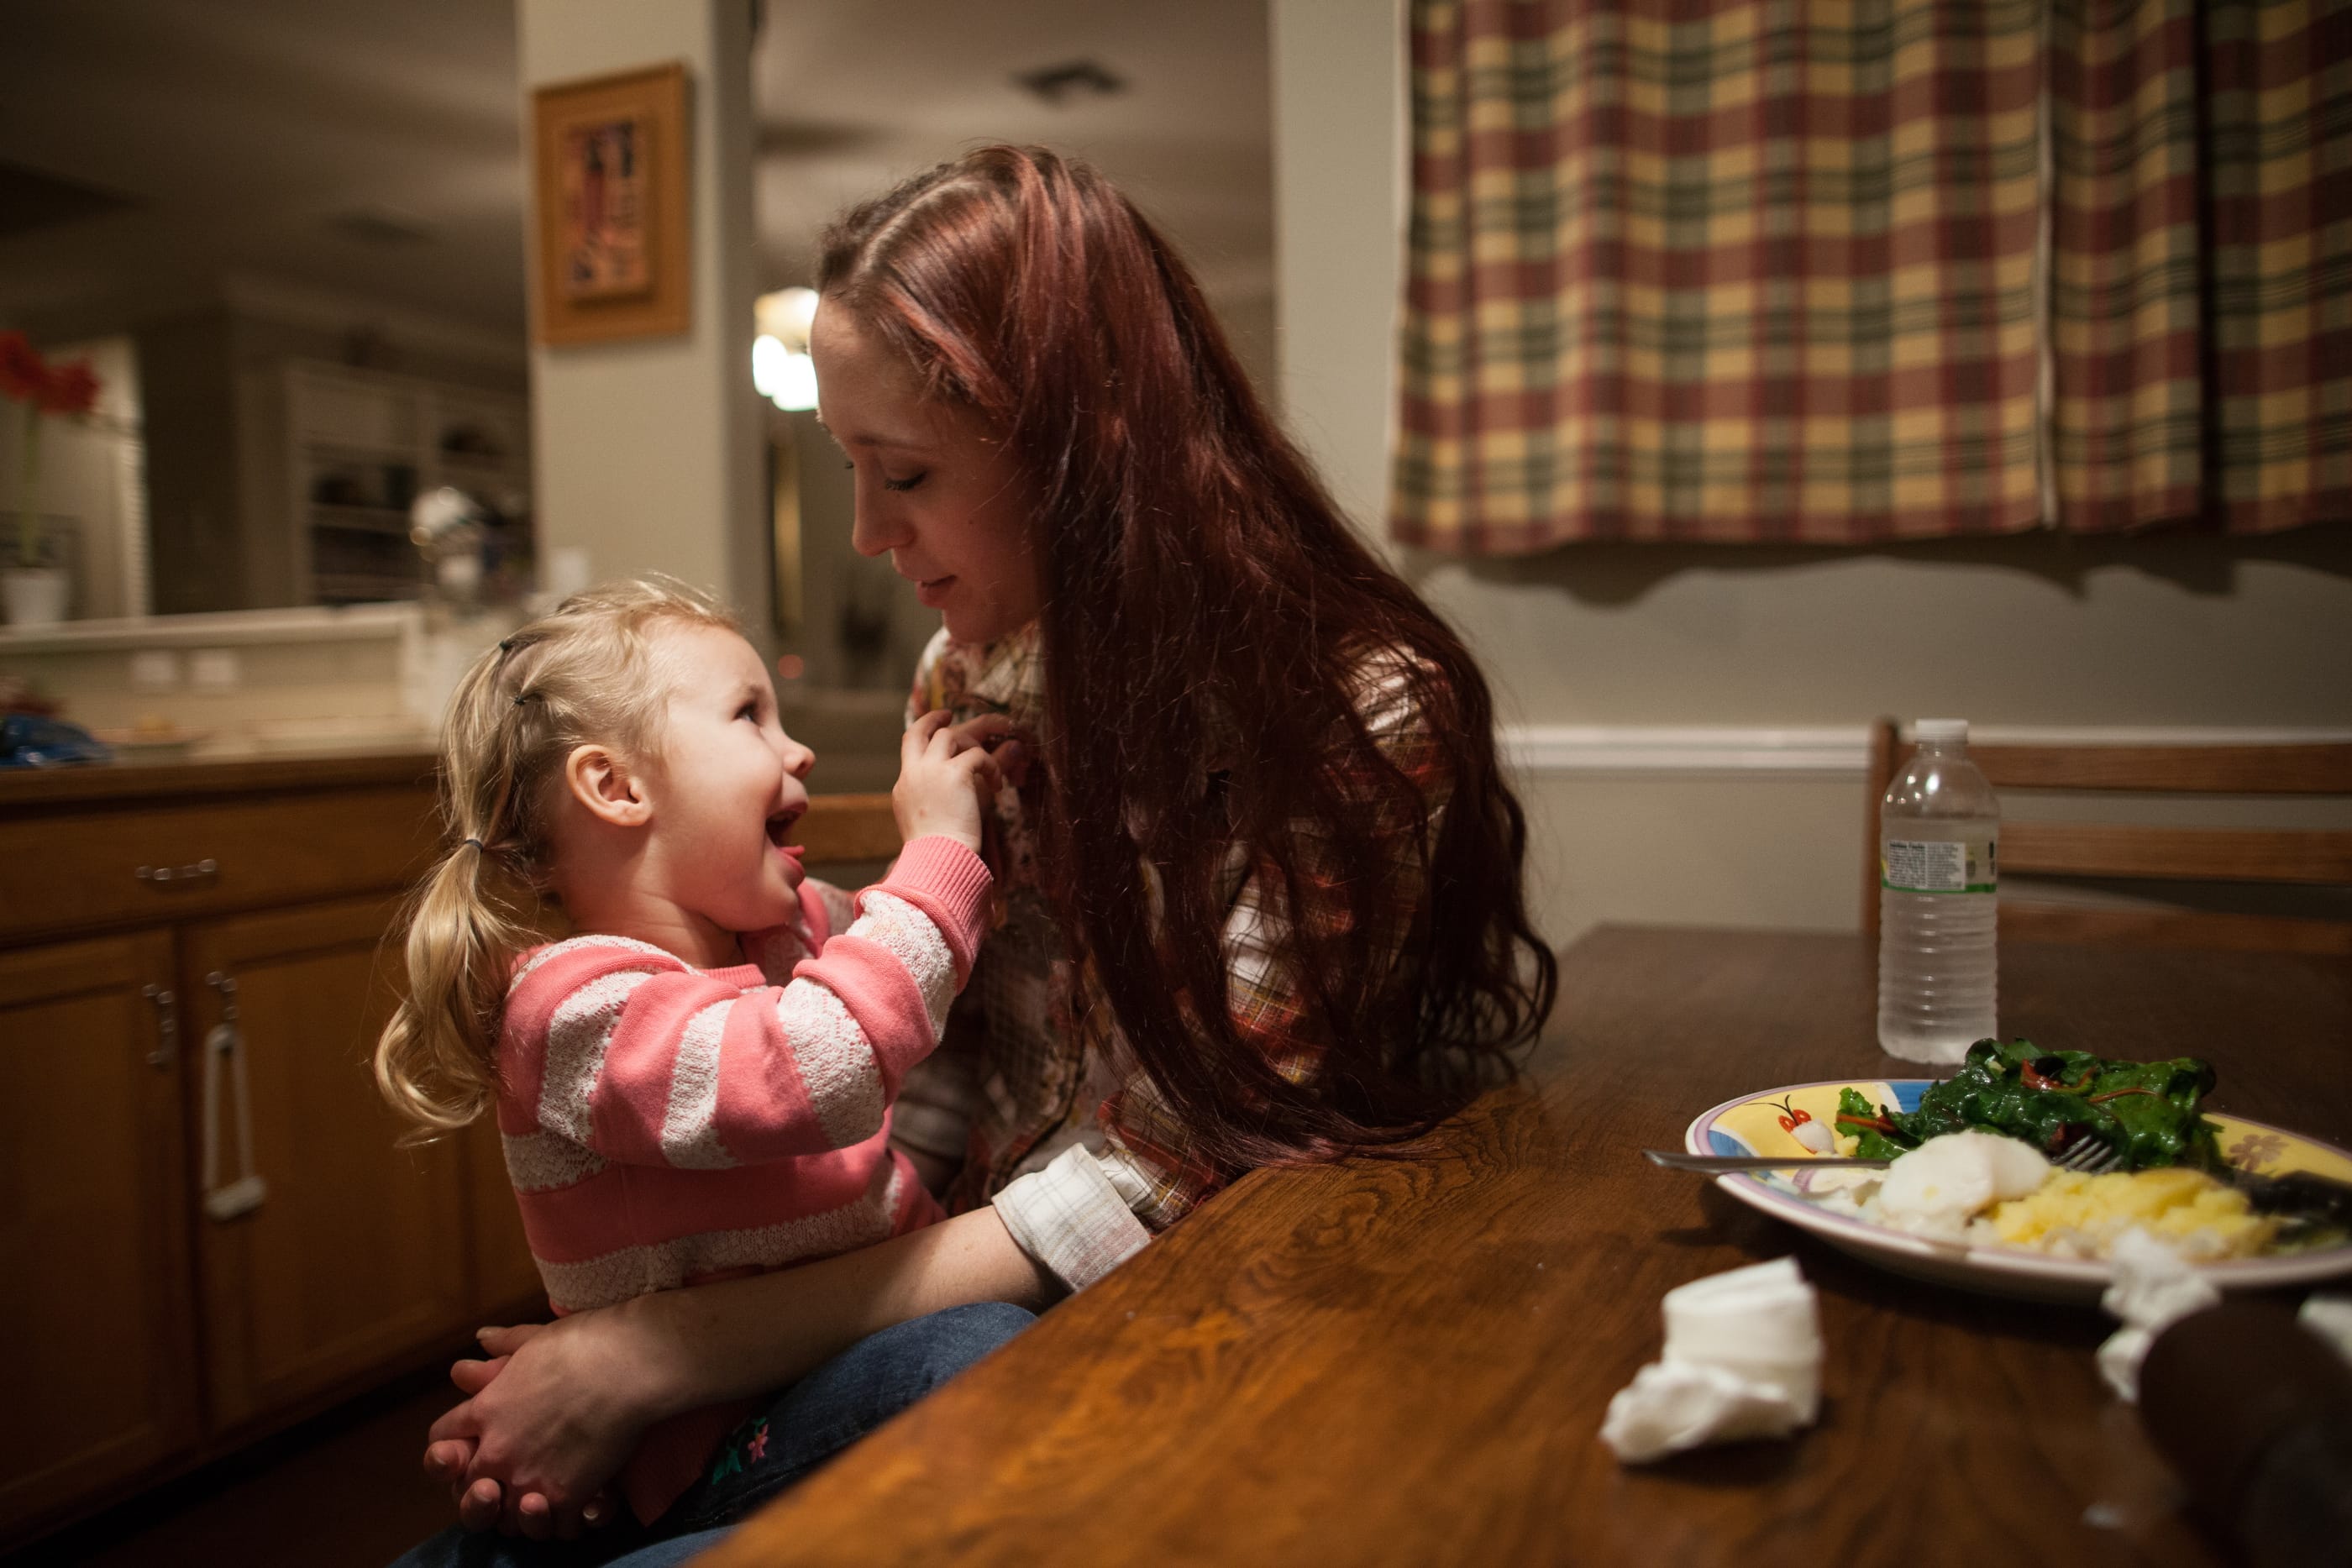 Maggie Barcellano sits down for dinner with her daughter, Zoe, 3, at Barcellano's father's house in Austin, Texas on Saturday. Barcellano, who lives with her father, enrolled in the food stamps program to help save up for paramedic training while she works as a home health aide and raises her daughter. Working-age people now make up the majority in U.S.